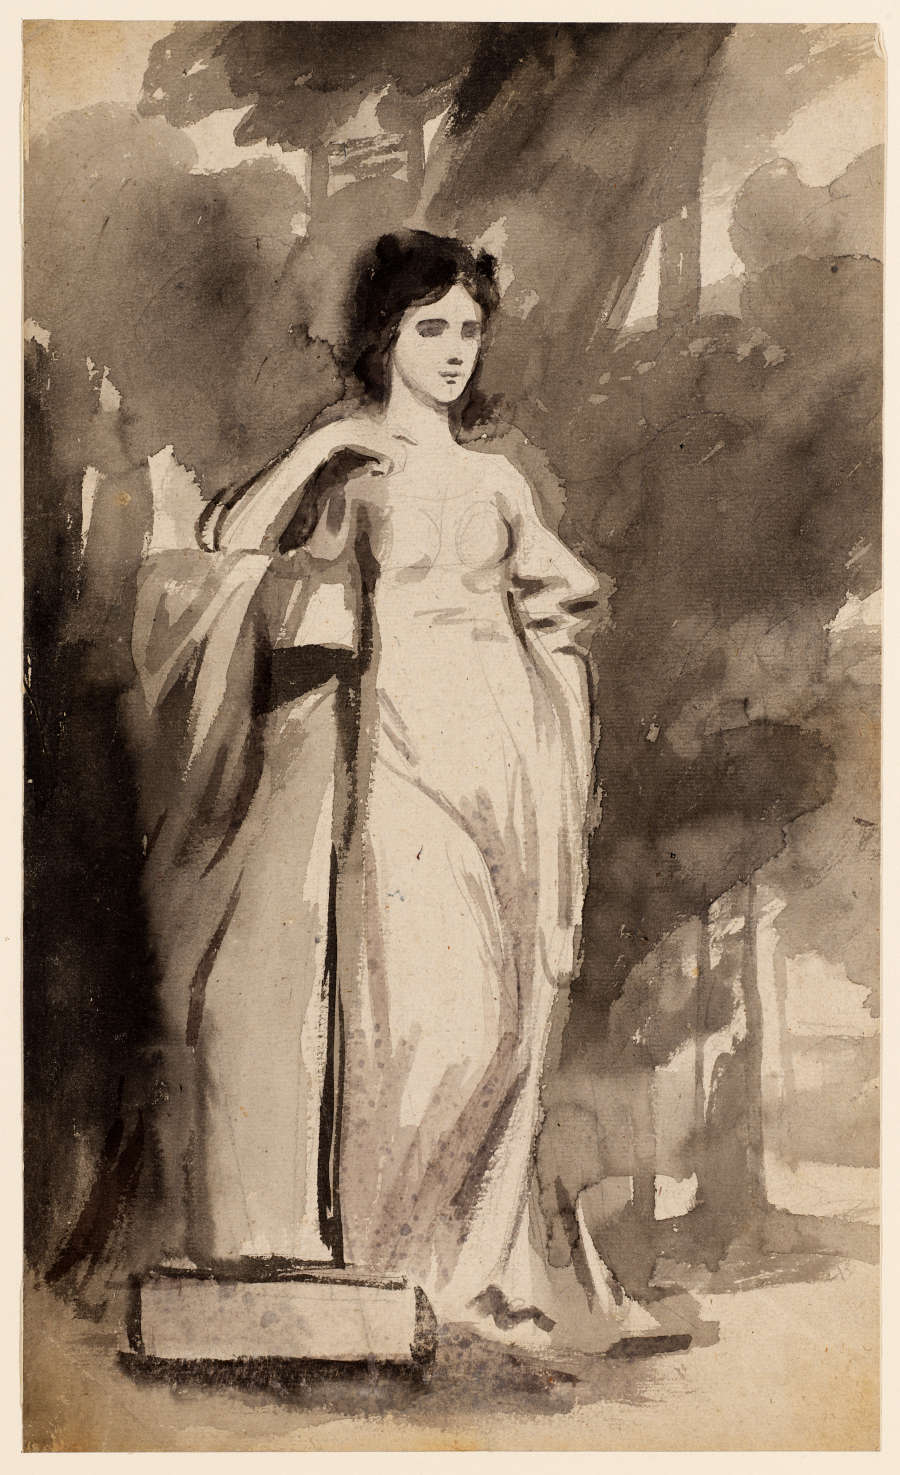 A black ink and wash drawing of a lone female figure wearing a gown leaning against a column. She looks off into the distance. The background is gestural and abstract.